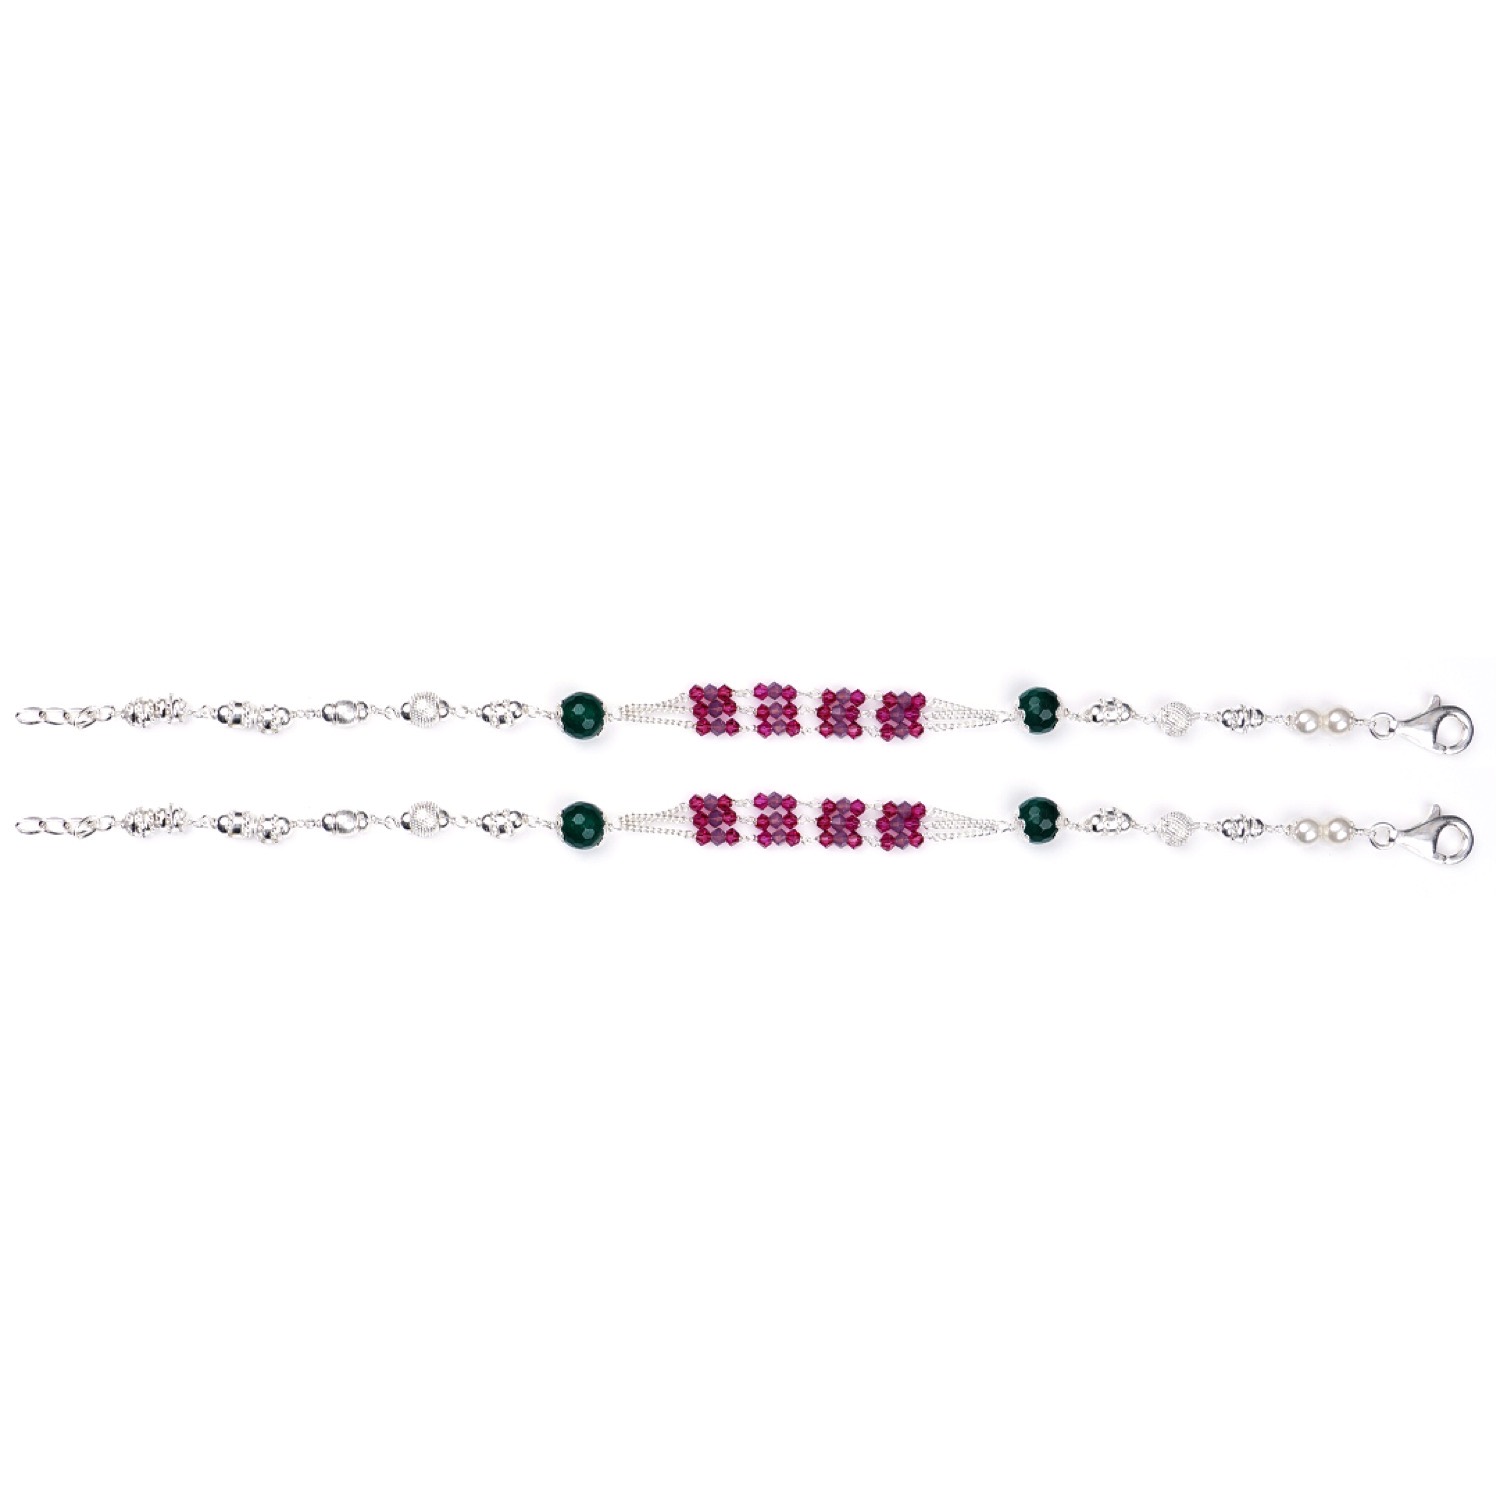 varam_anklets_072022_pink_and_green_stone_silver_anklets_4-1